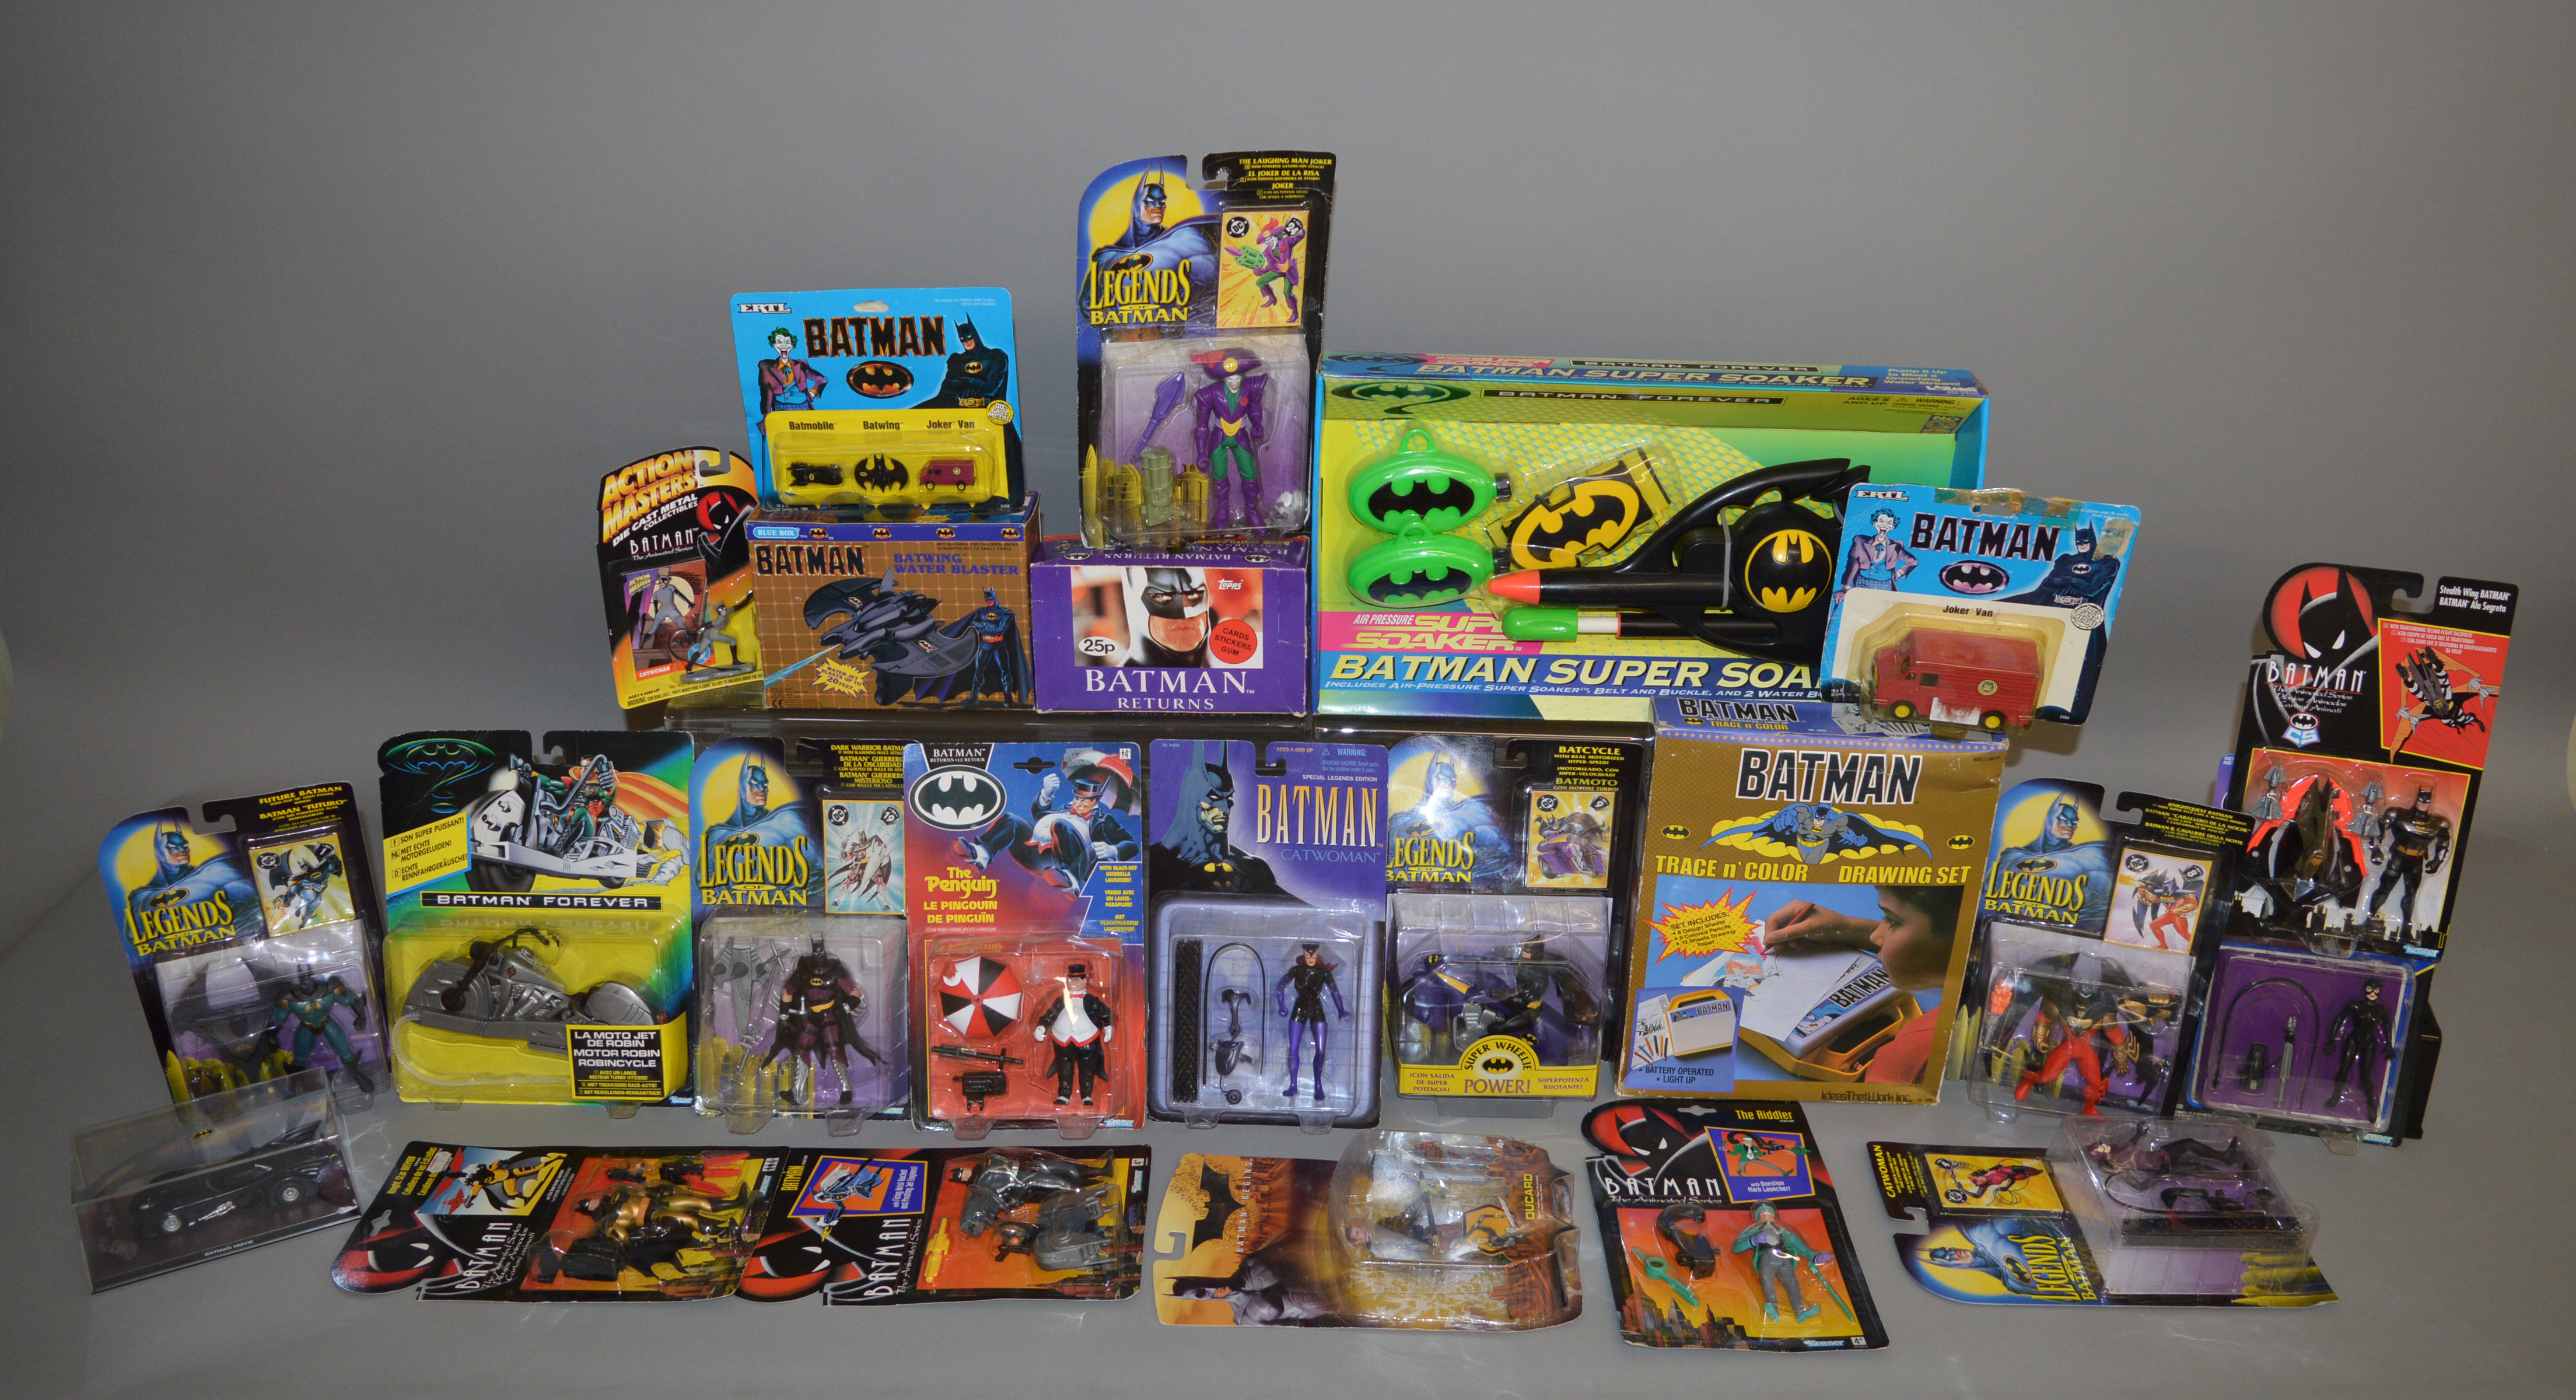 21 Batman items, which includes Trace and Color, figures, Bating Wing Blaster etc (21).